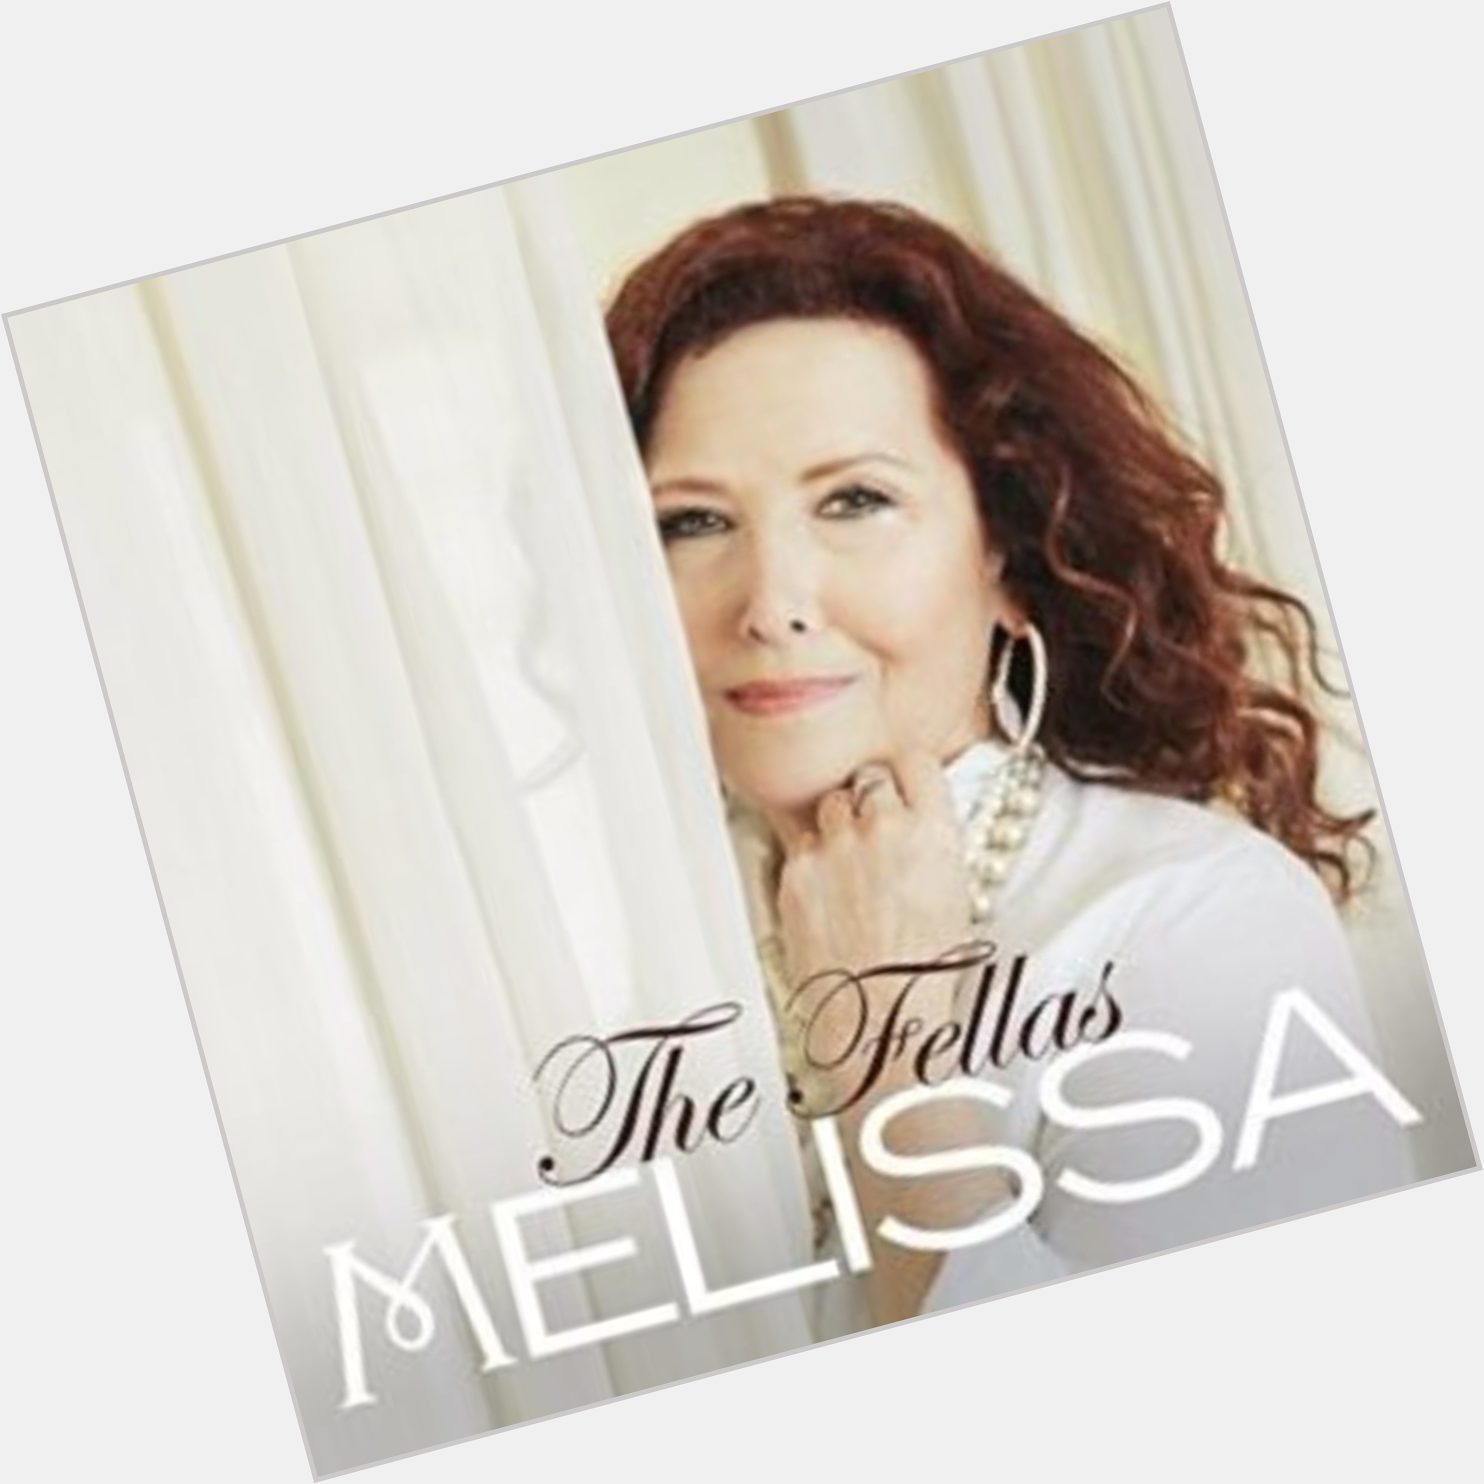 Happy Birthday to singer, songwriter, musician and actress Melissa Manchester born on February 15, 1951 